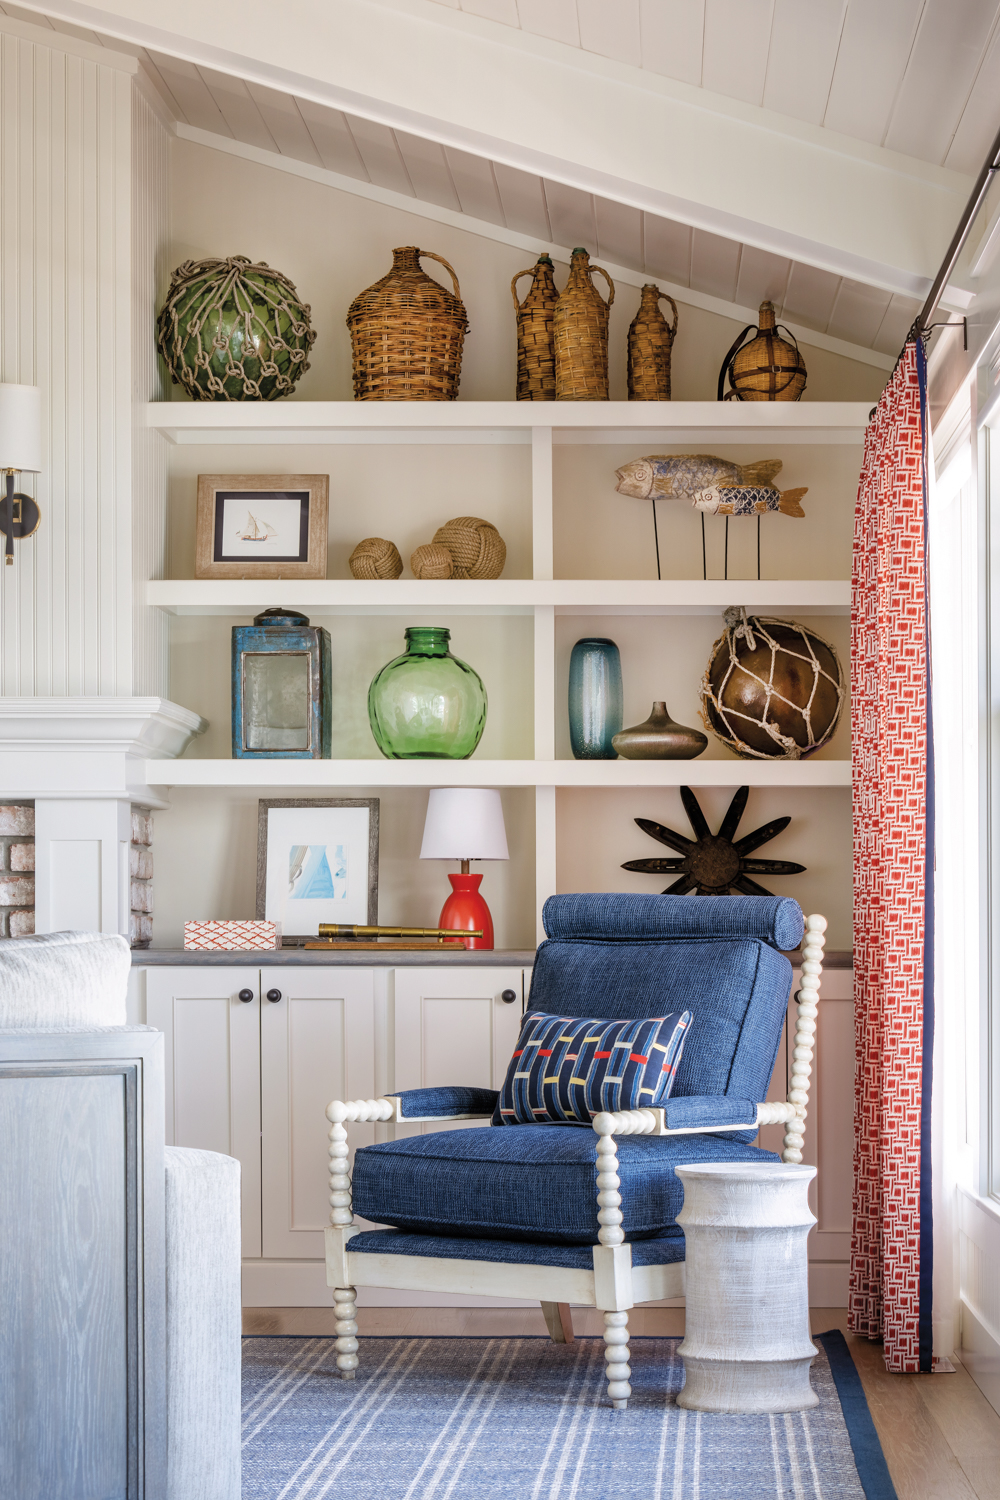 A blue armchair sits in front of white built-in shelves displaying a collection of objects.